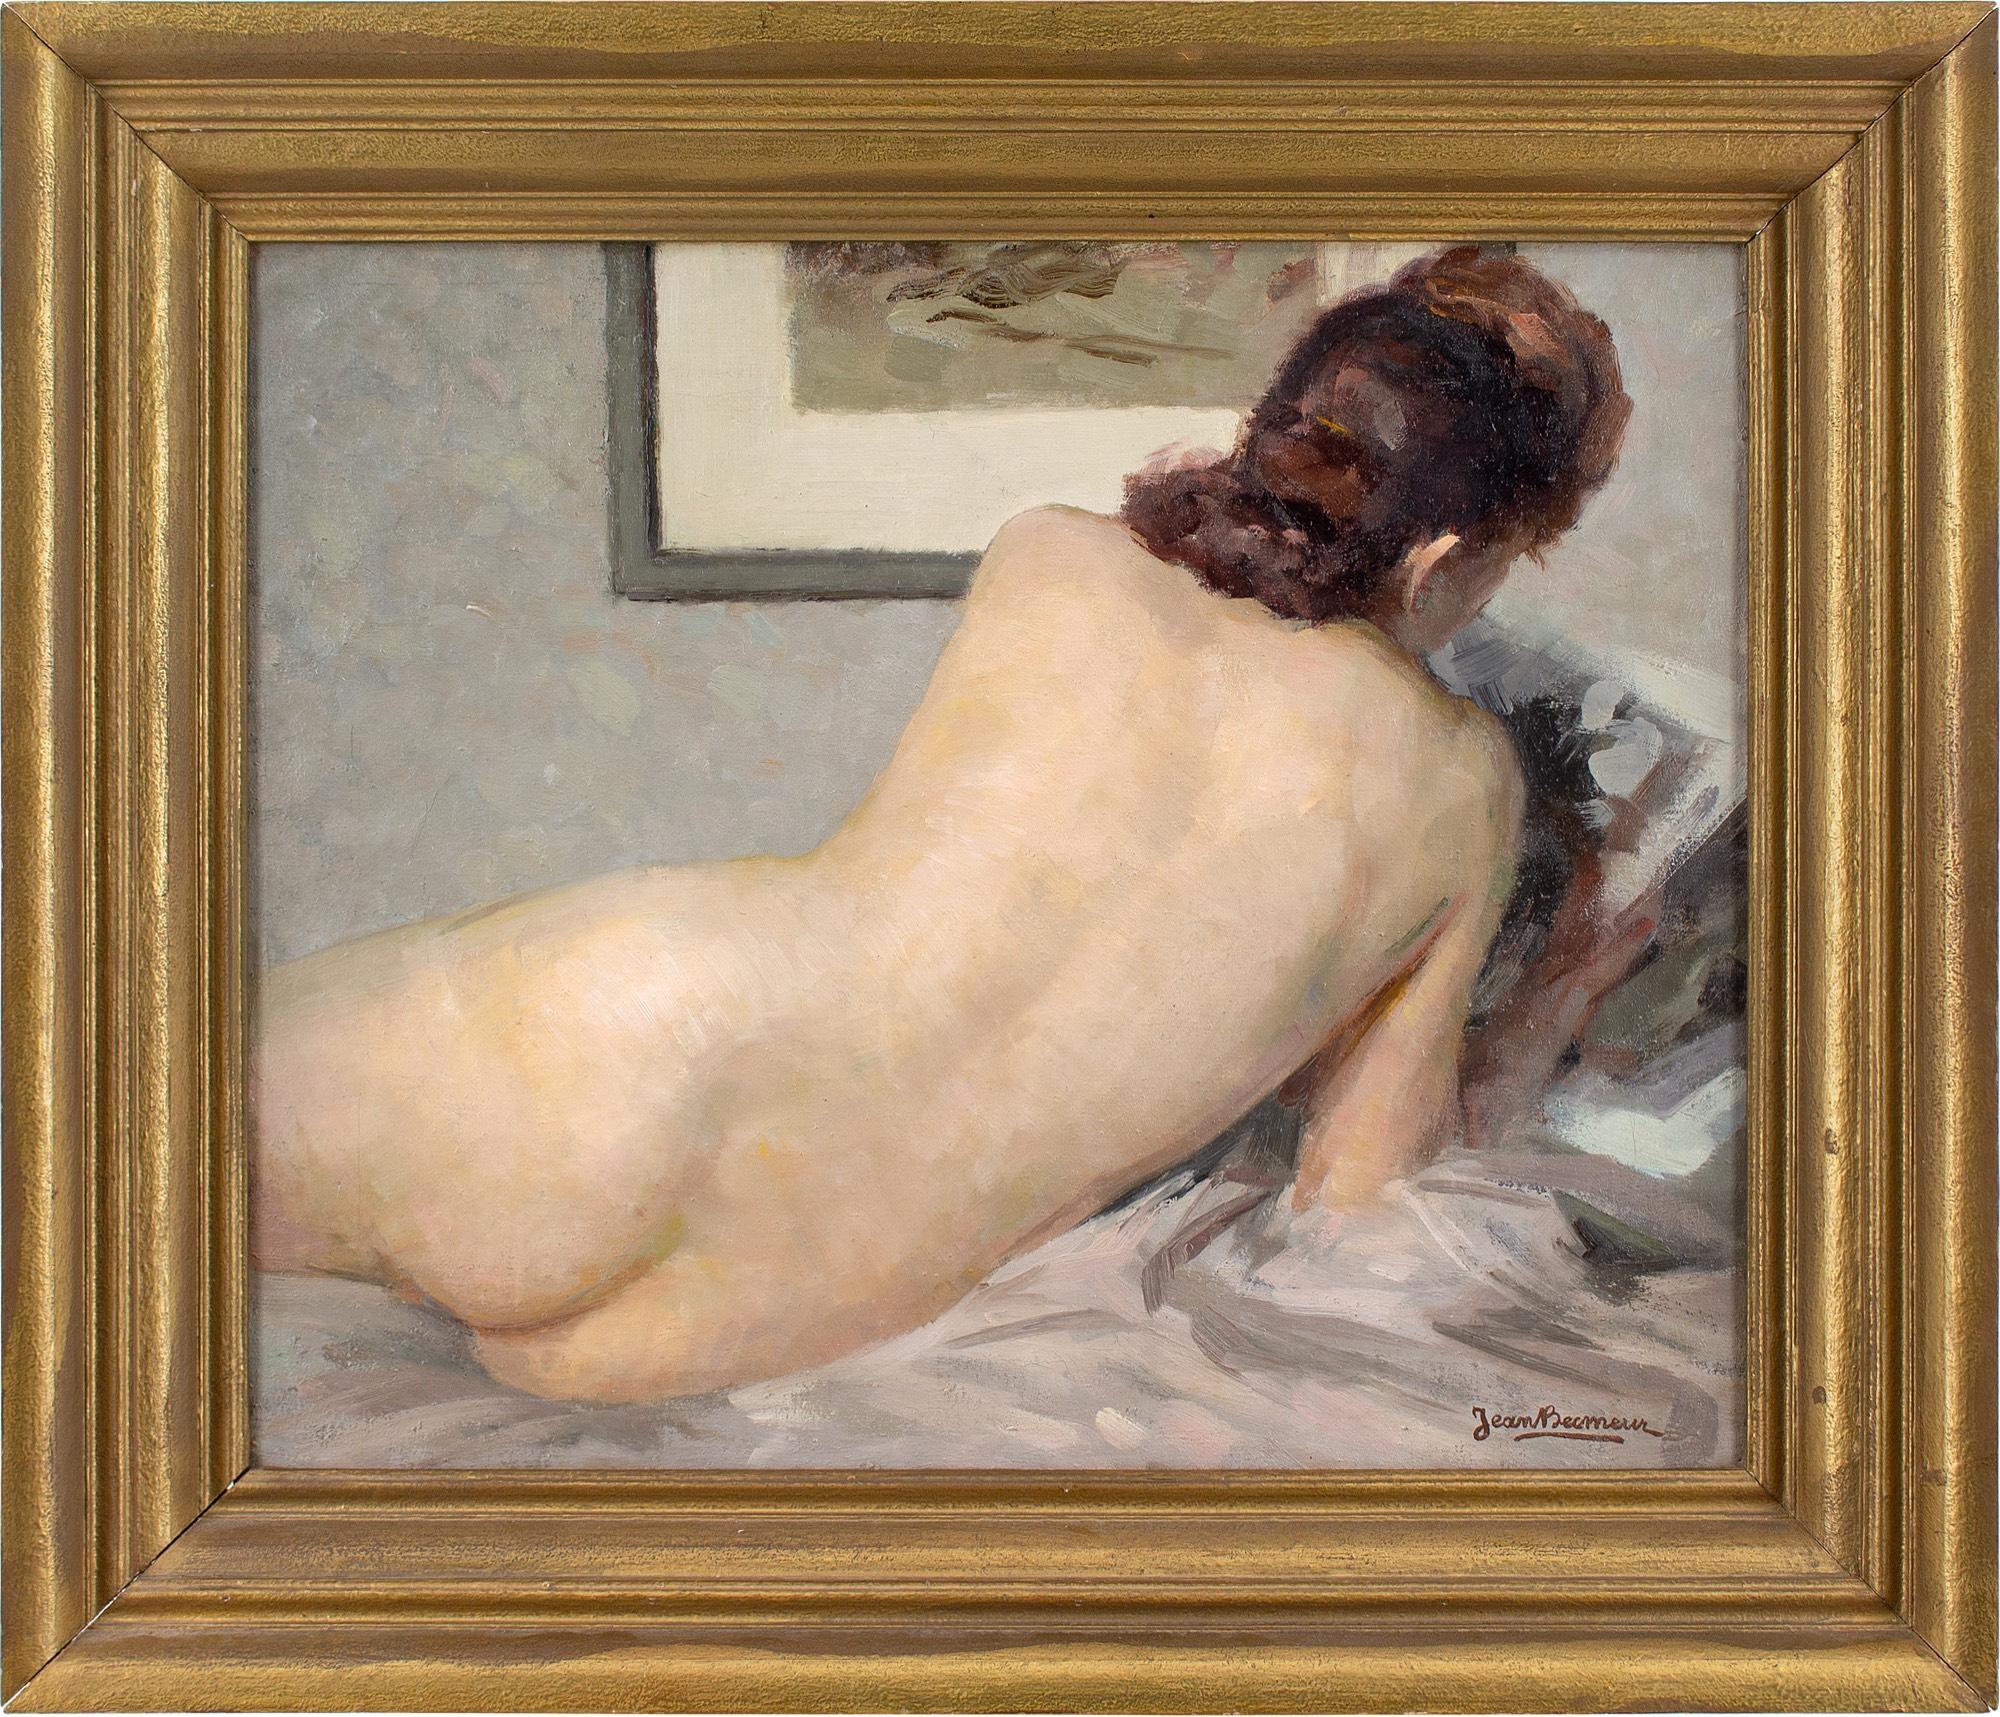 This mid-20th-century oil painting by French artist Jean Becmeur (1890-1952) depicts a female nude relaxing upon a bed while reading.

The sensuous indented form of a curved spine leads the eye downwards as she reads with a laissez-faire attitude.